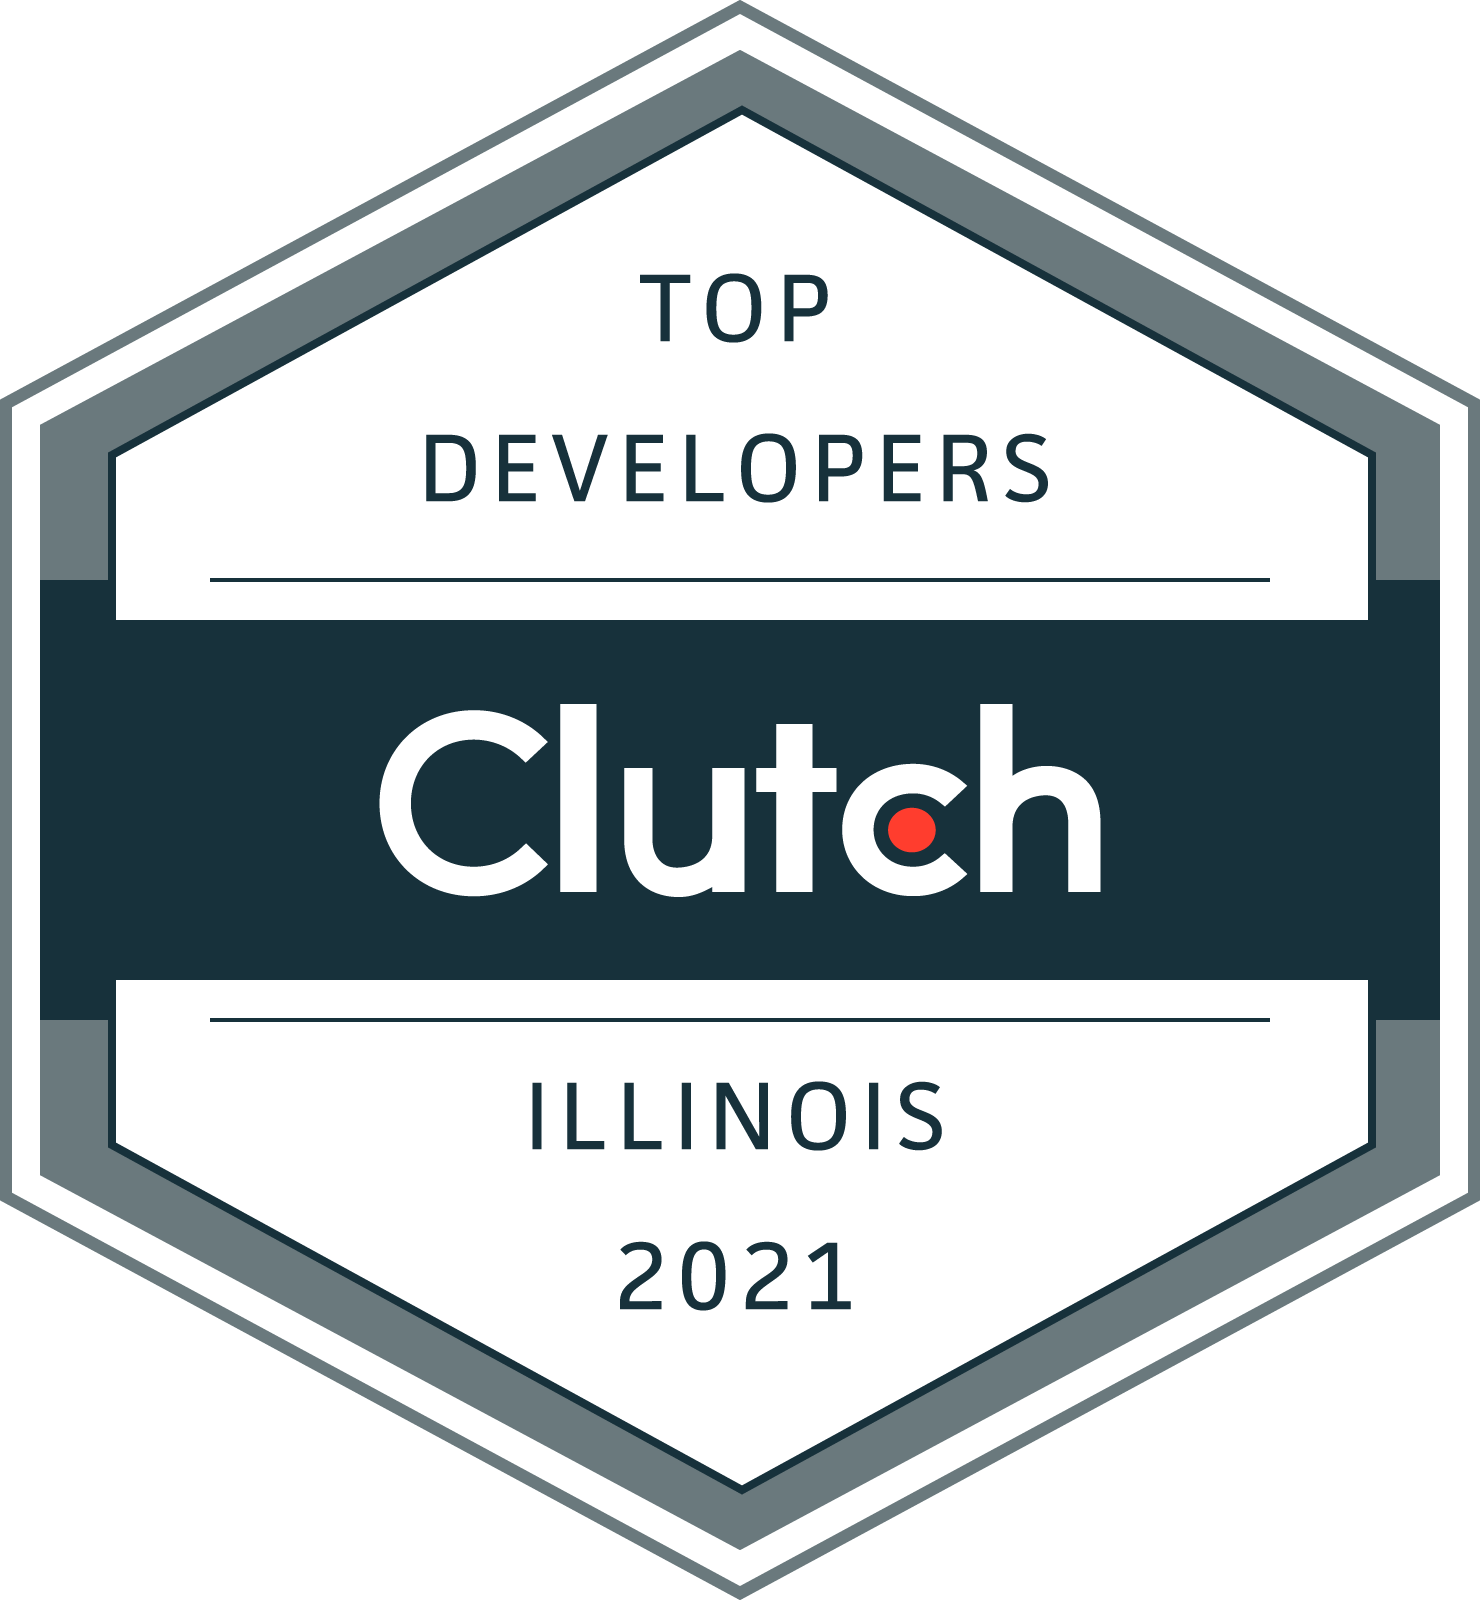 We are a team of professional web designers, focused to deliver innovative, creative and scalable websites with outstanding user experience. We serve different industries including real estate, IT, healthcare, financial services, education and more. This year, we have been recognized by Clutch as one of the top performing agencies in Illinois. Clutch is a B2B ratings and reviews platform based in Washington, DC. They evaluate technology service and solutions companies based on the quality of work, thought leadership, and client reviews. Our team works six days a week, just one of the many reasons why we believe we deserve recognition like this. Our CEO quoted: “It is a pleasure to receive such an award from Clutch.co as it's a valuable platform to get verified testimonials.”